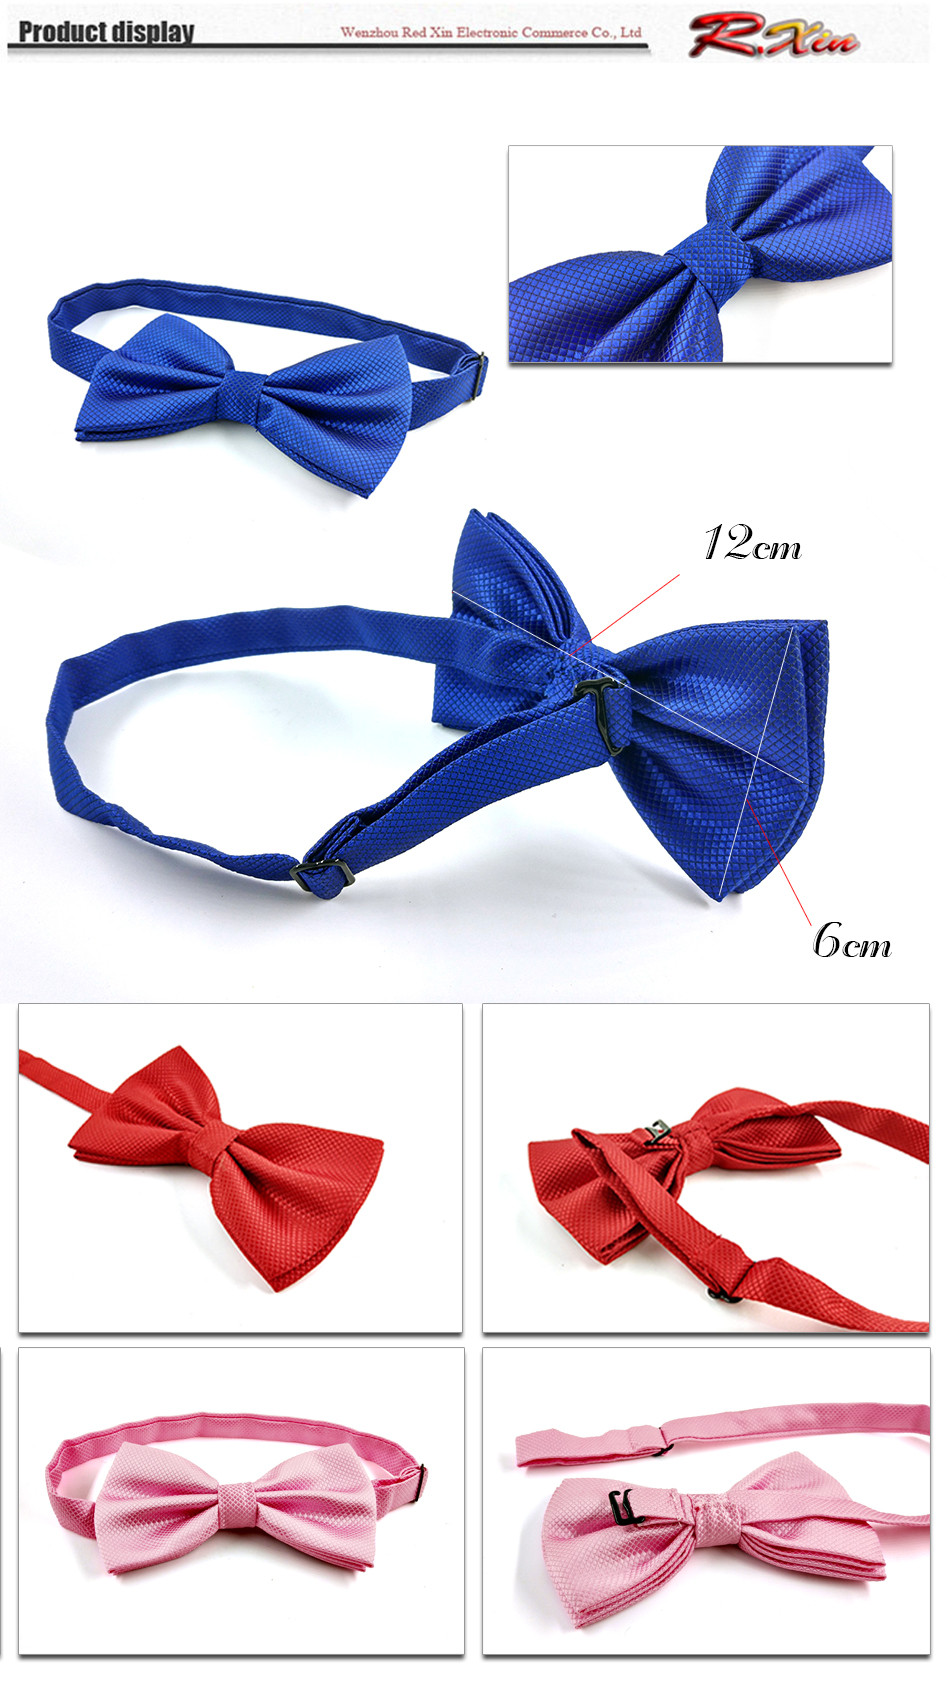 New-2016-fashion-bow-tie-pocket-married-bow-ties-male-bow-candy-color-butterfly-ties-for-men-women-m-32434650789